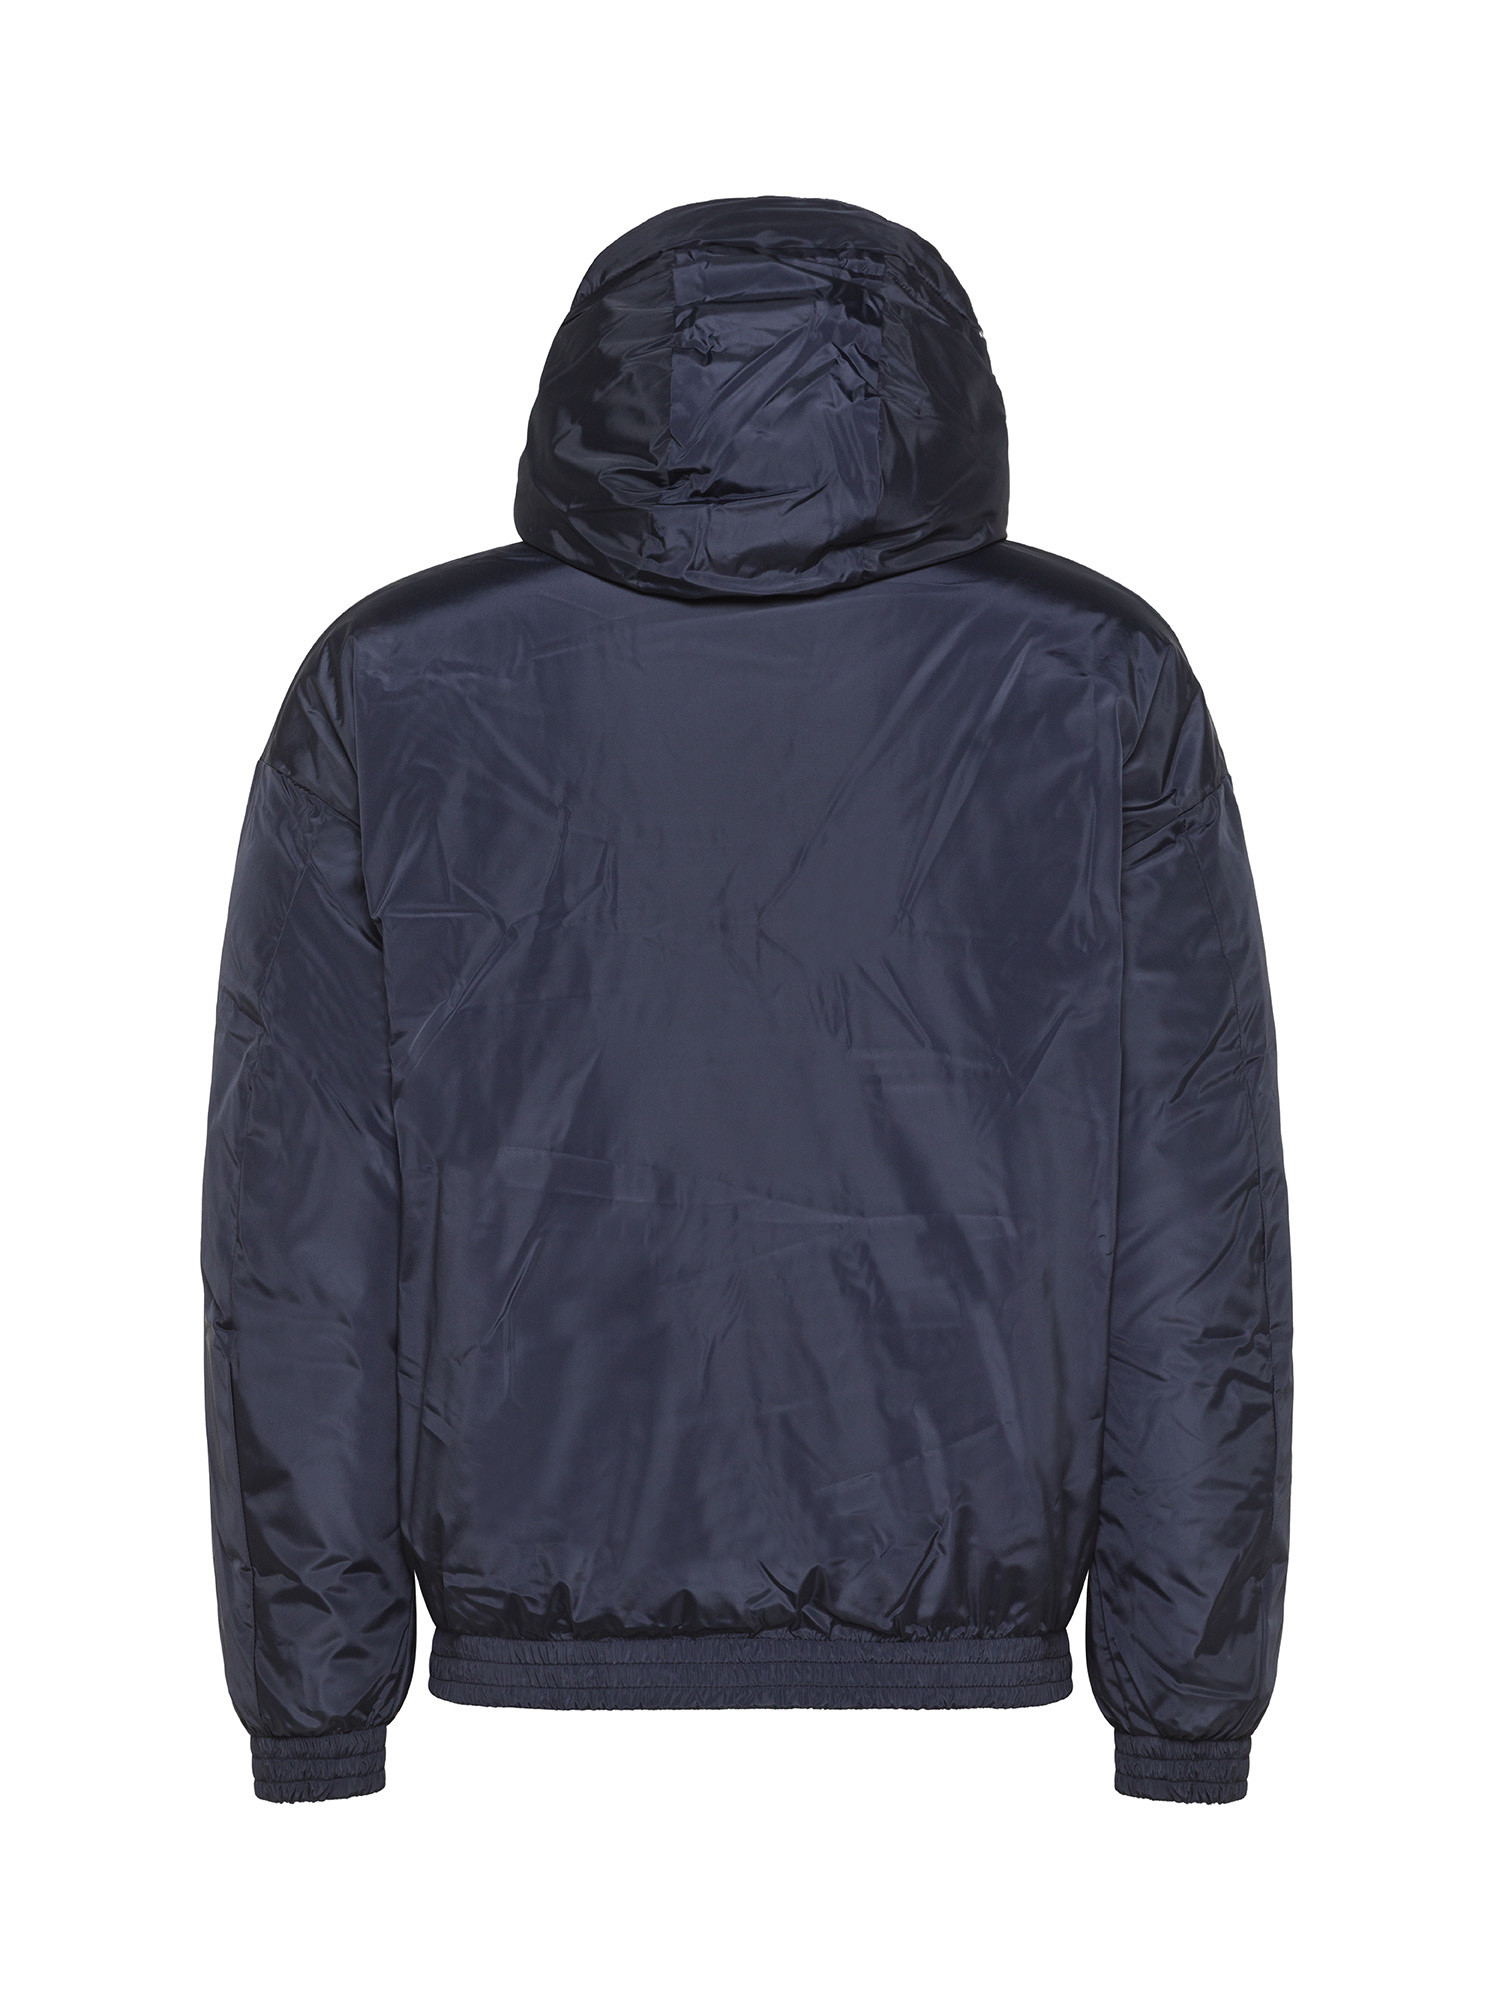 Emporio Armani - Reversible down jacket with hood in nylon, Dark Blue, large image number 1